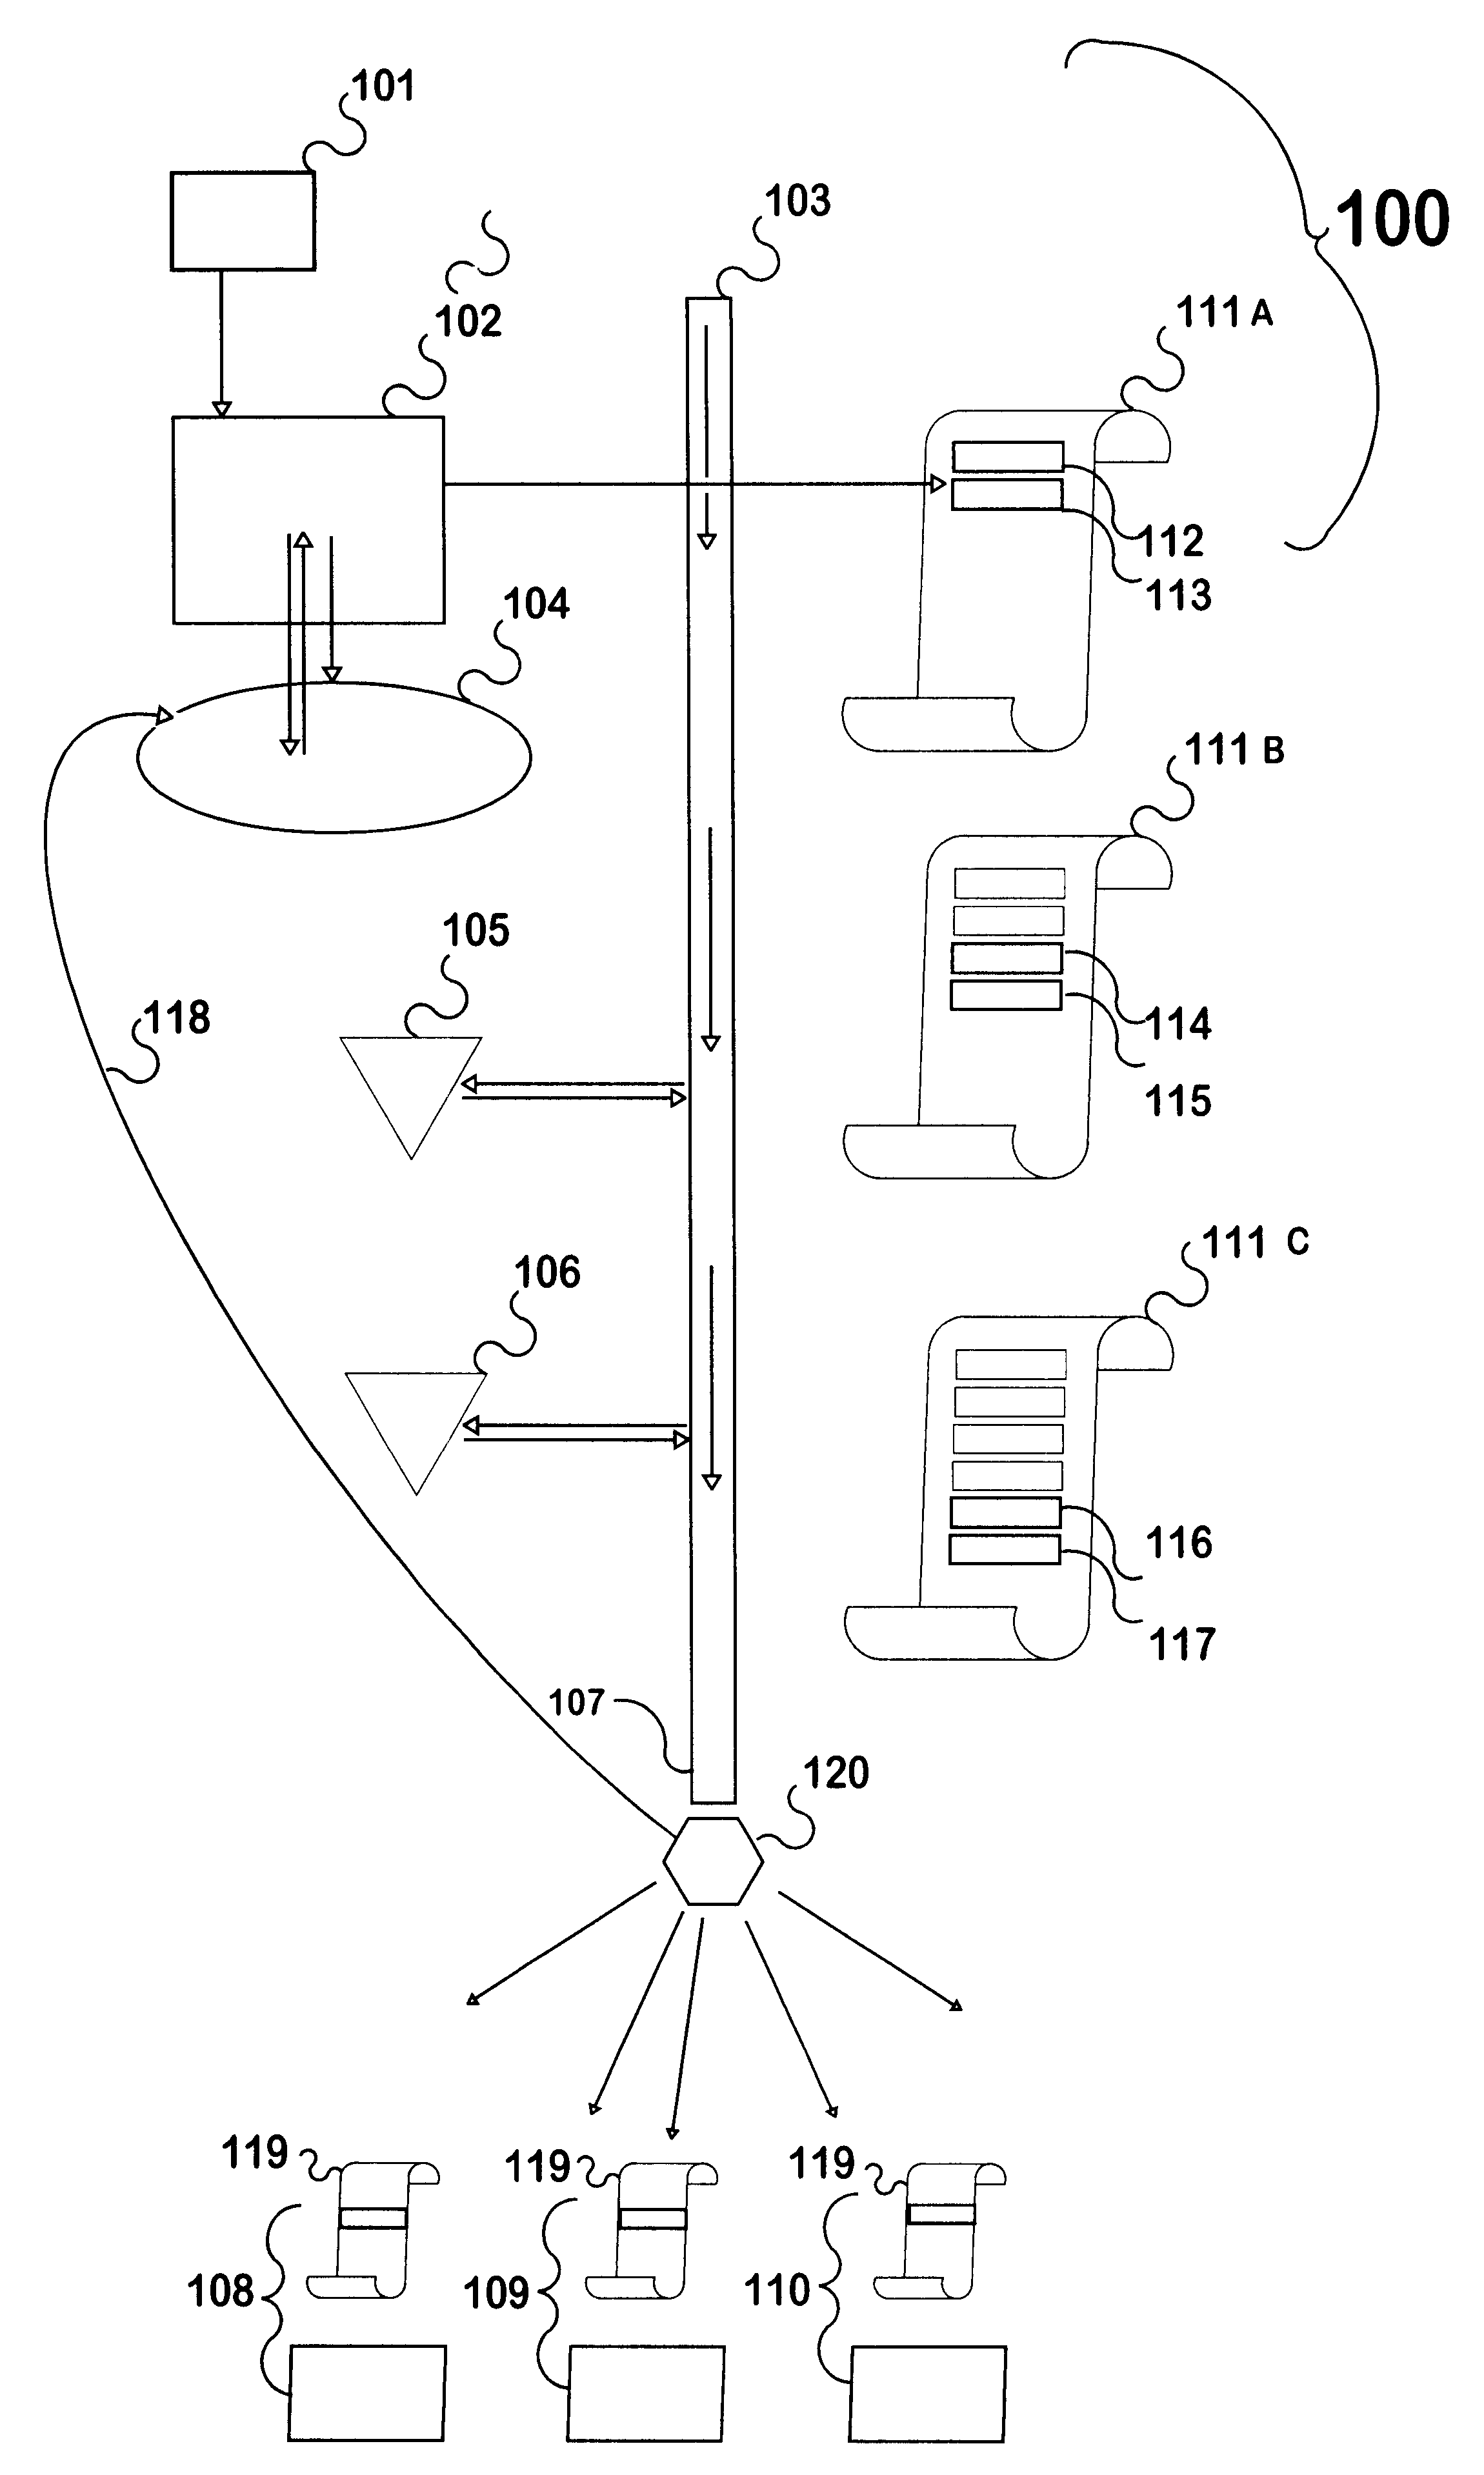 Terminal for an active labelling system